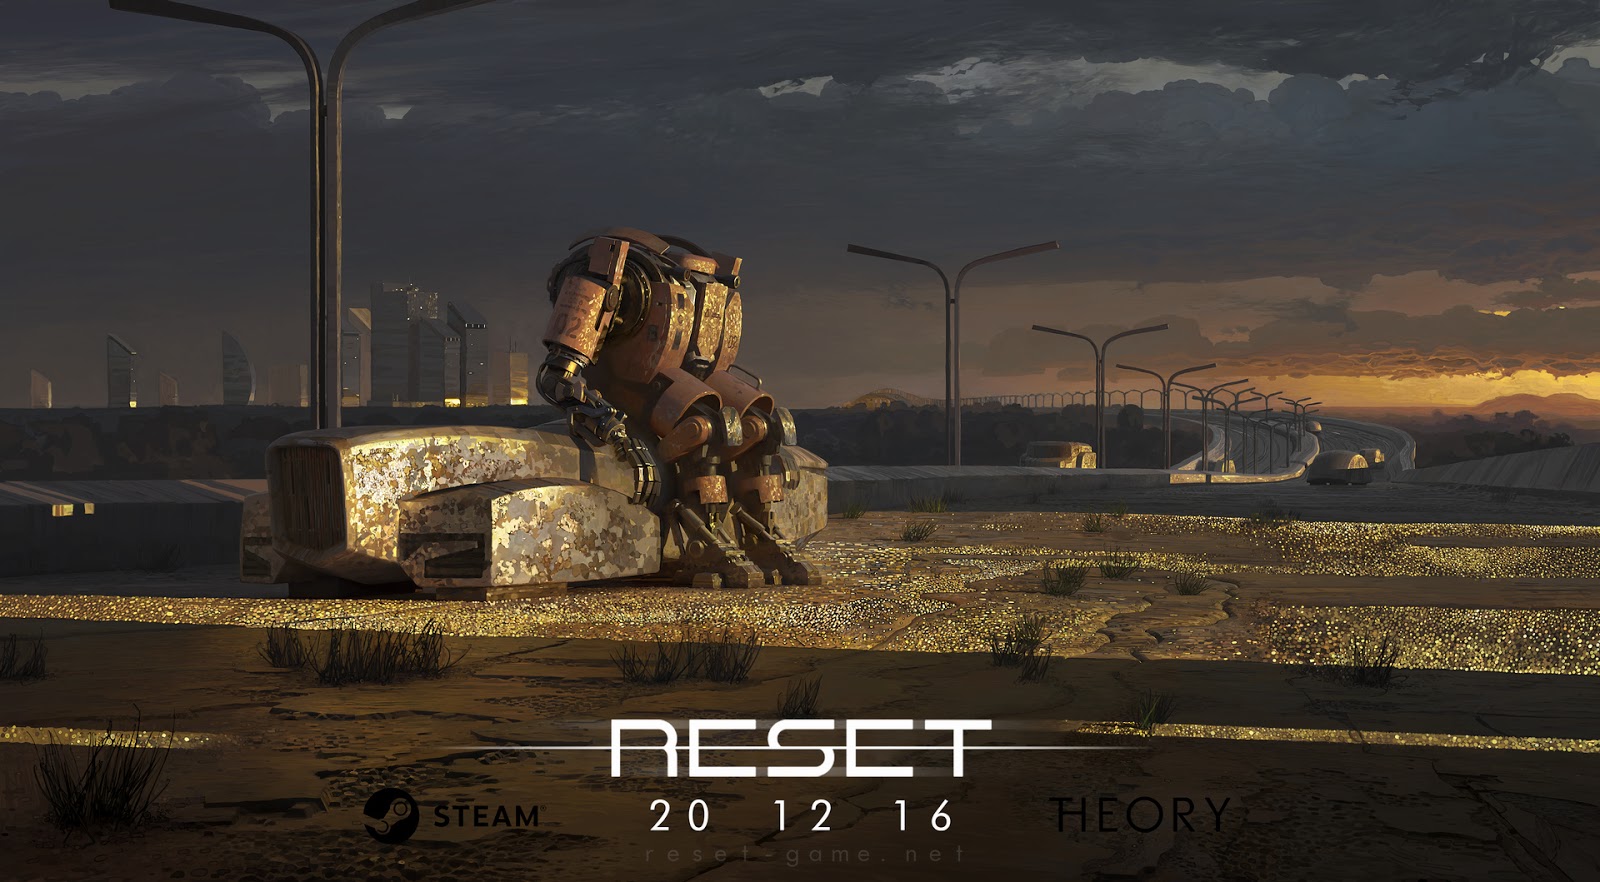 Reset, Theory Interactive, puzzle, indie game, PC, Steam, головоломка, инди-игра, фантастика, SciFi